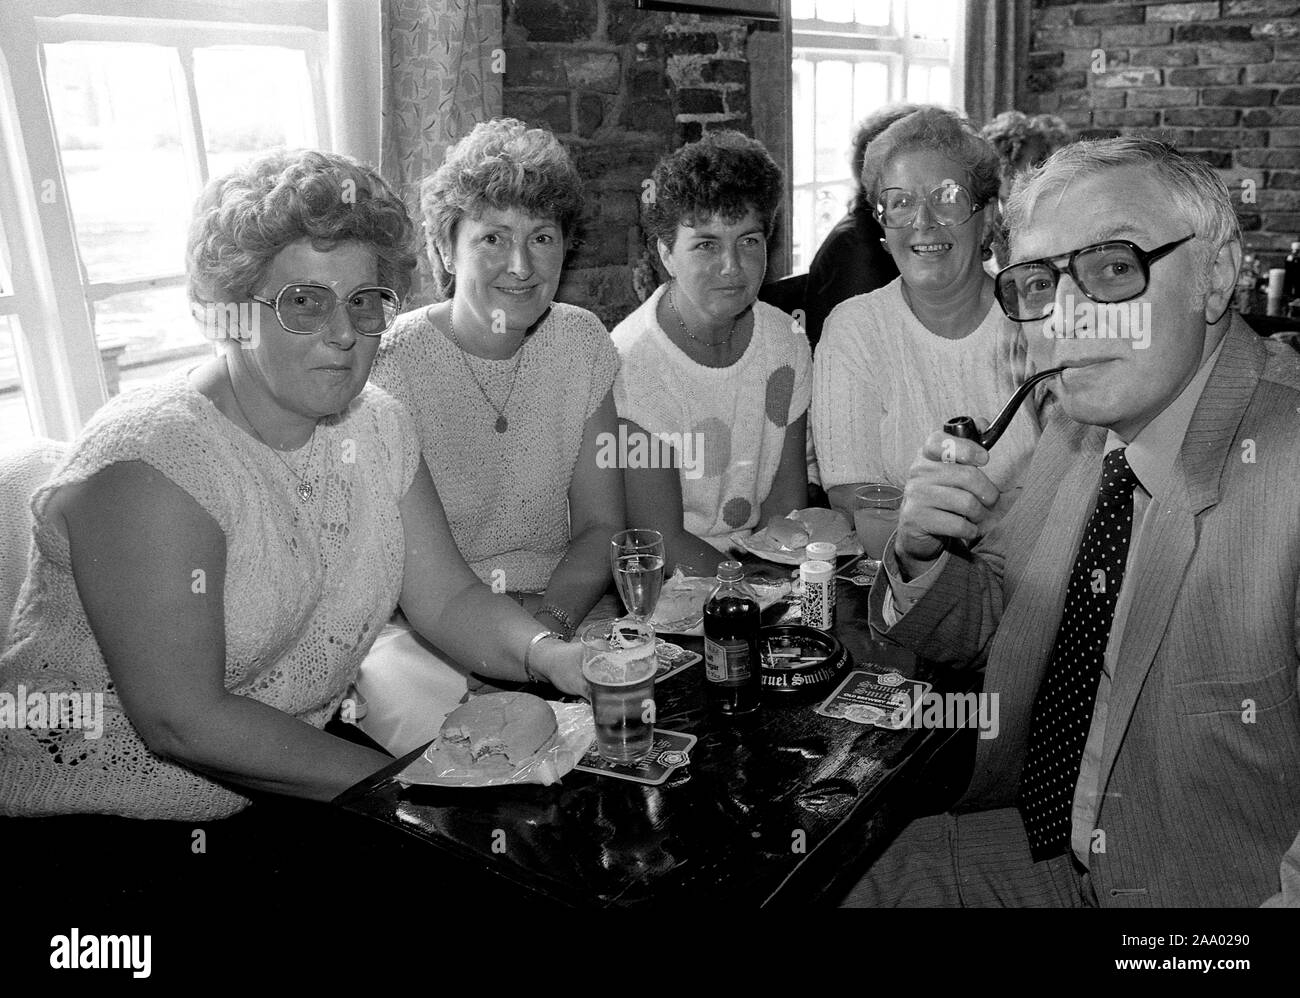 Man smoking his pipe watched by ladies in the pub before the smoking ban Britain, Uk, 1985 Stock Photo